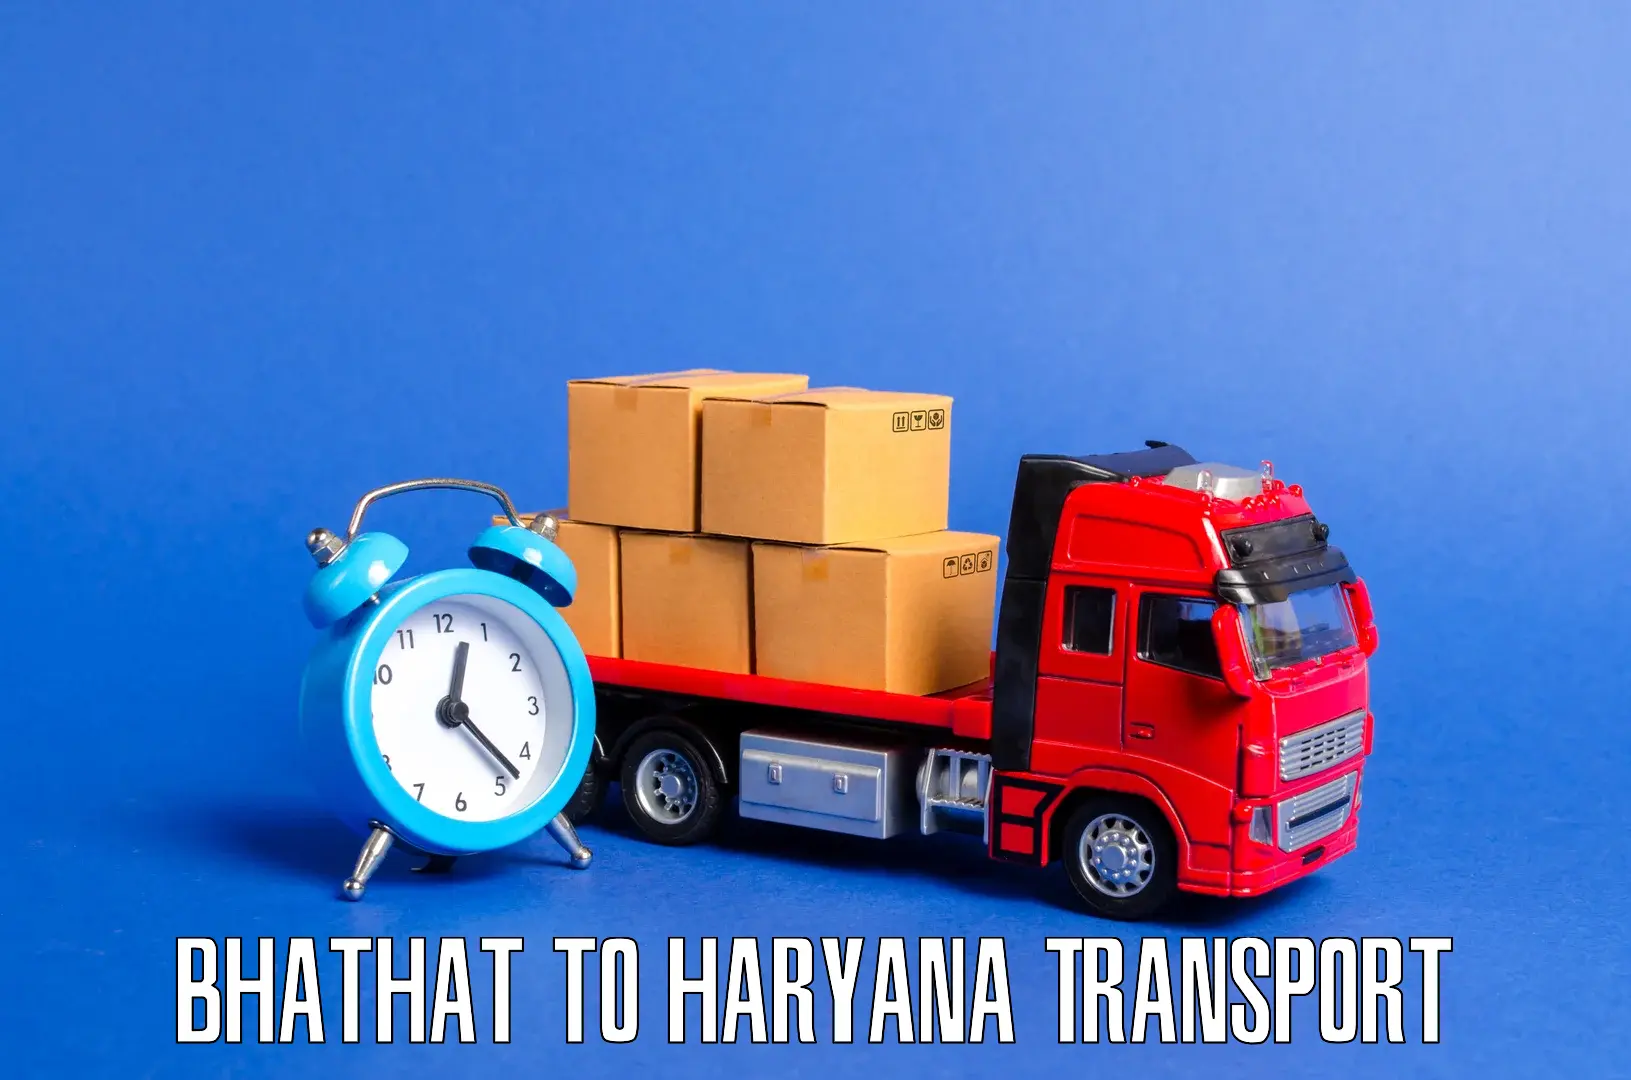 Interstate transport services Bhathat to Odhan